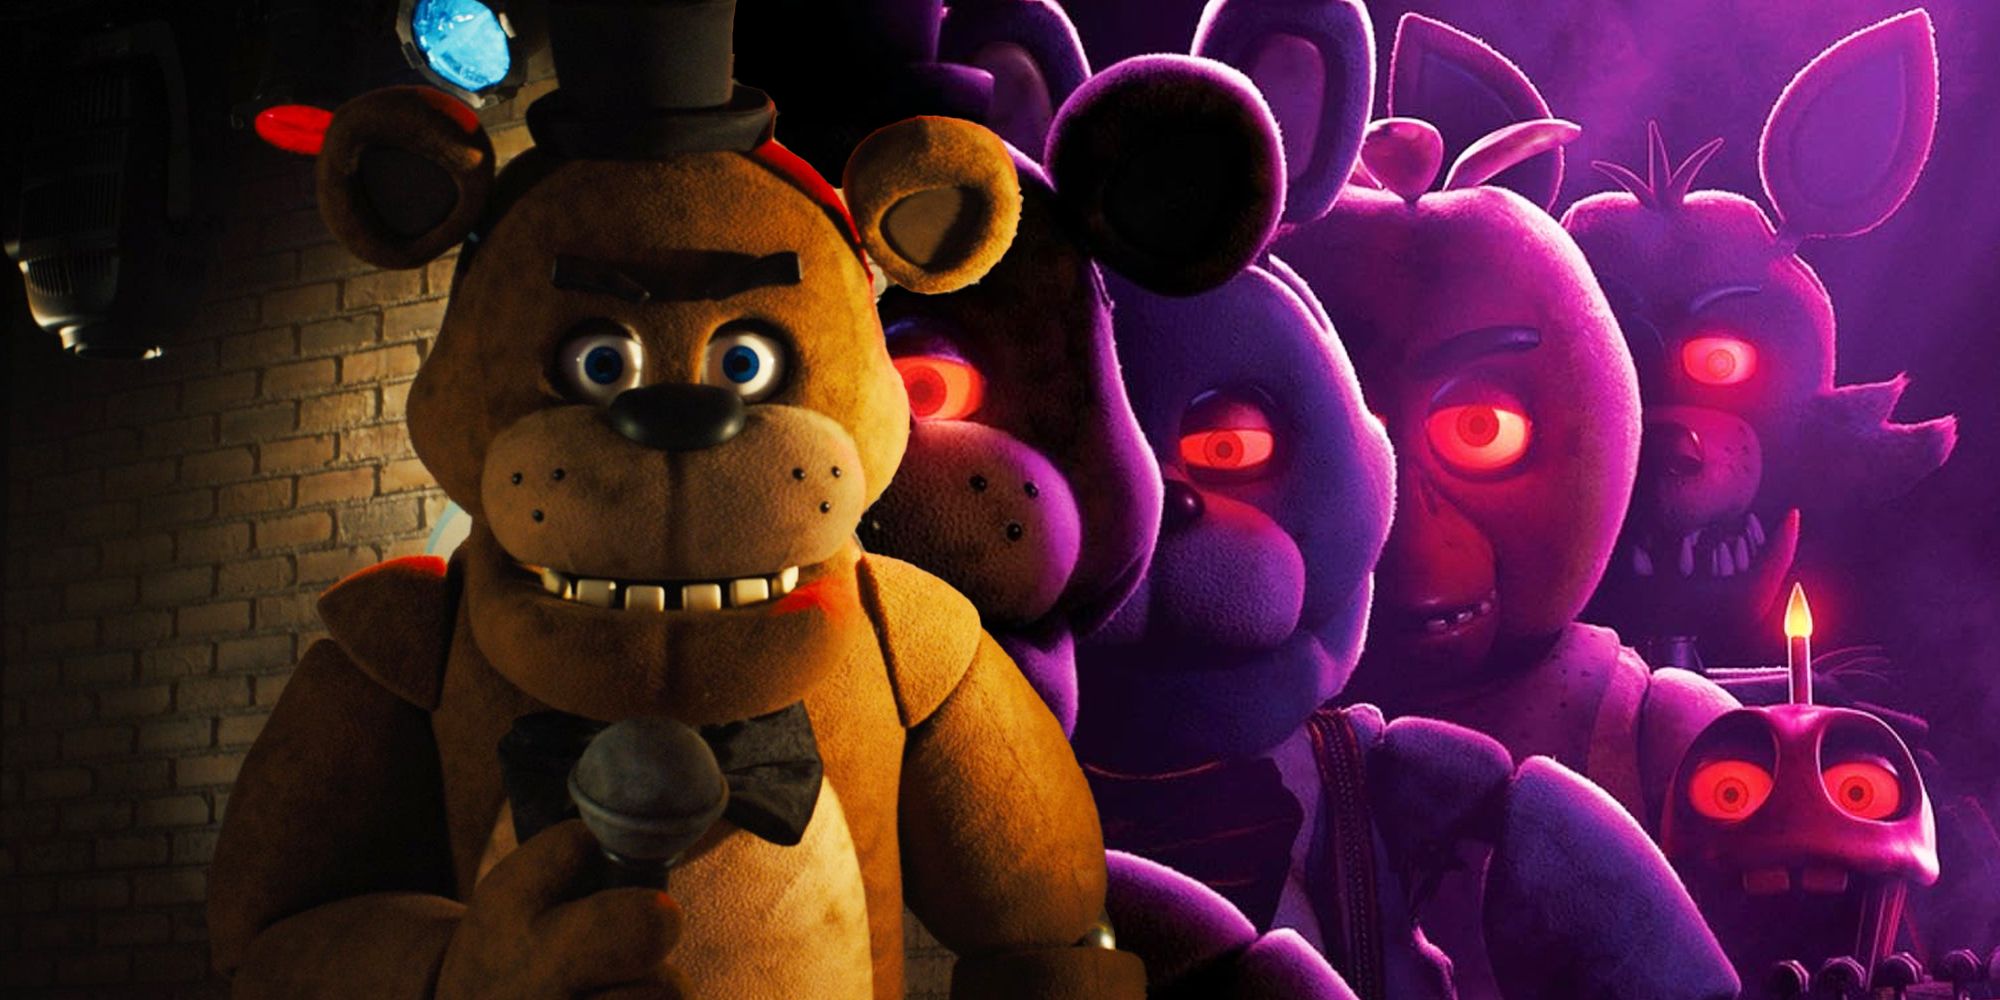 Five Nights At Freddy’s 2 Confirmed, Release Timeline Revealed